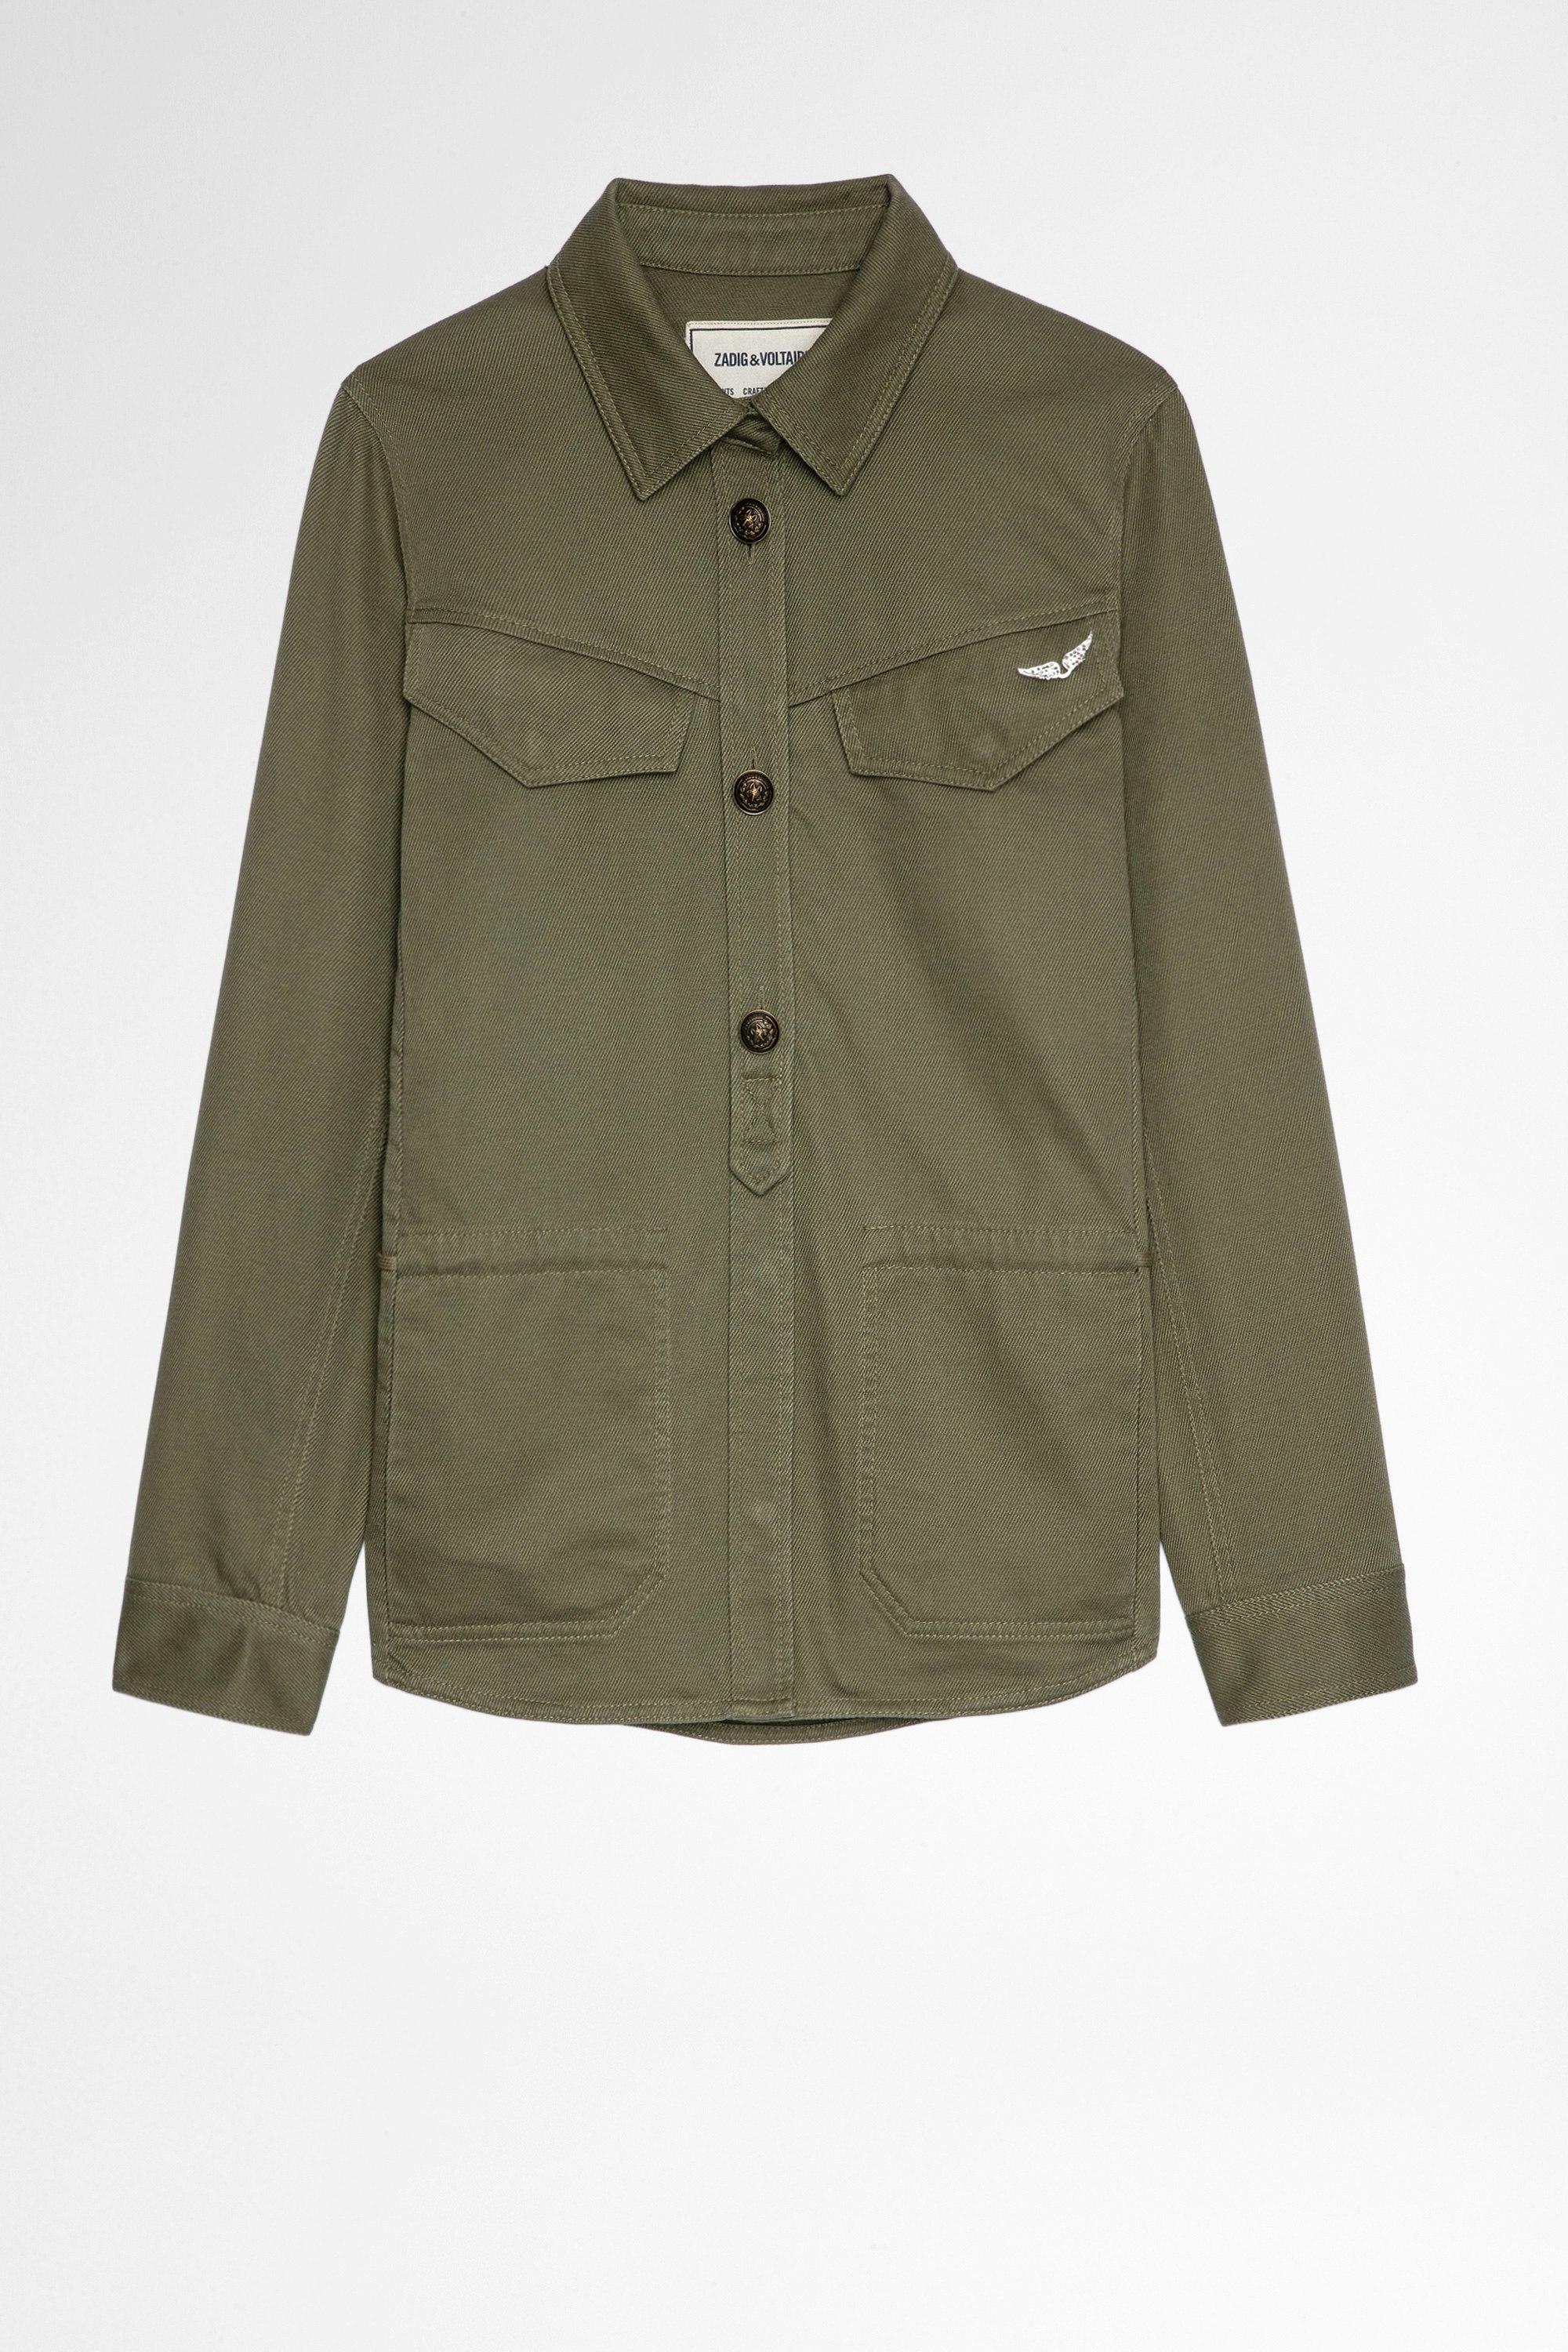 Tackl Shirt Women's khaki cotton shirt with happy patch on the back. Made with fibers from organic farming.